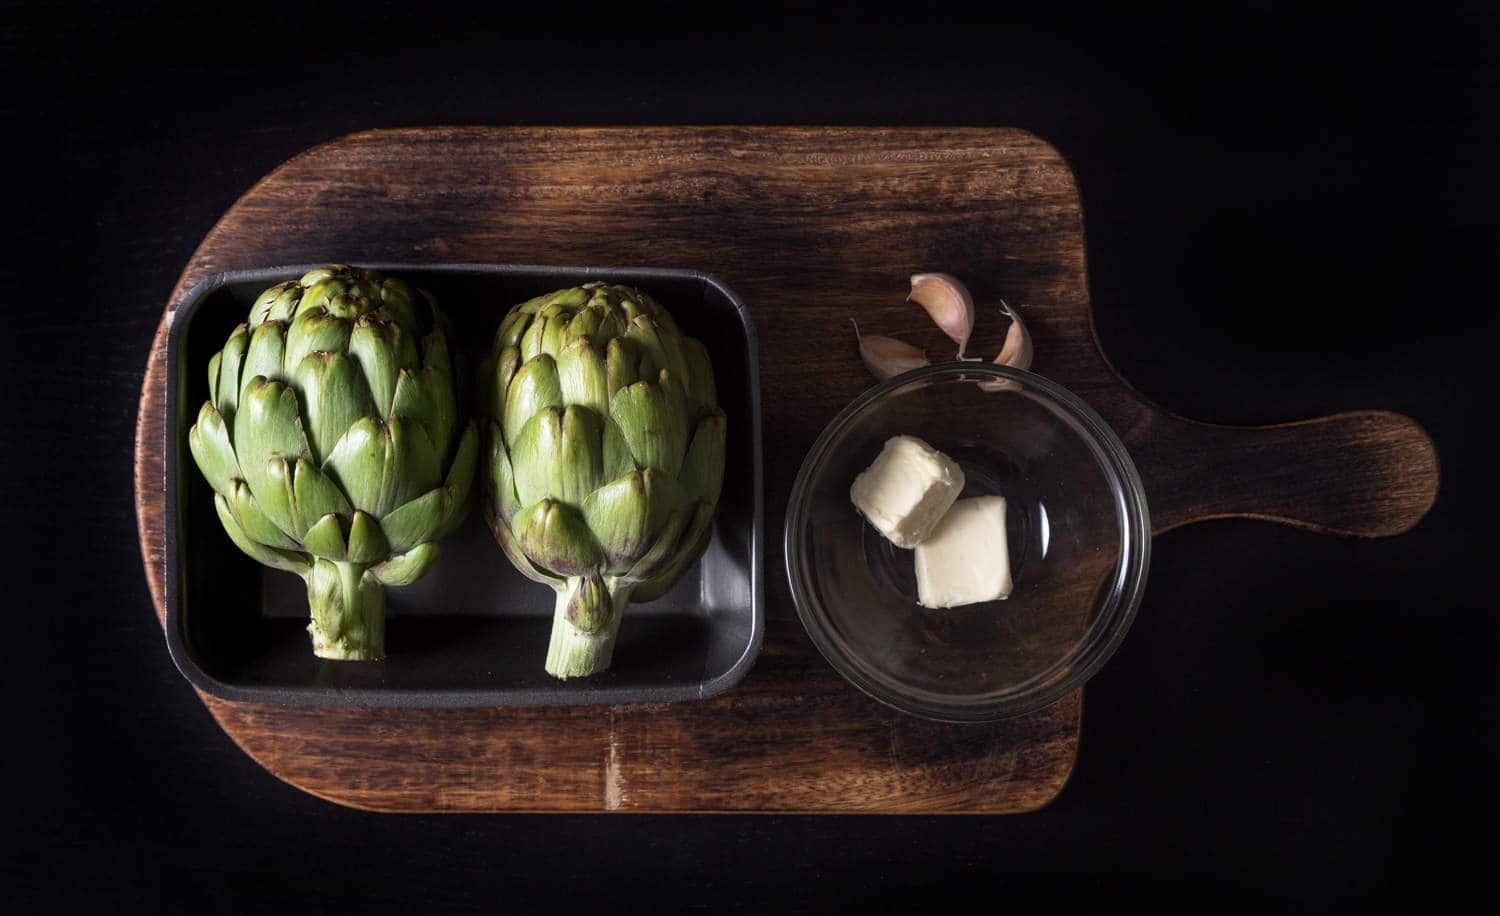 Make this Easy Foolproof Artichokes Recipe in 20 mins! Superfood nutrient powerhouse with delicious delicate flavors.